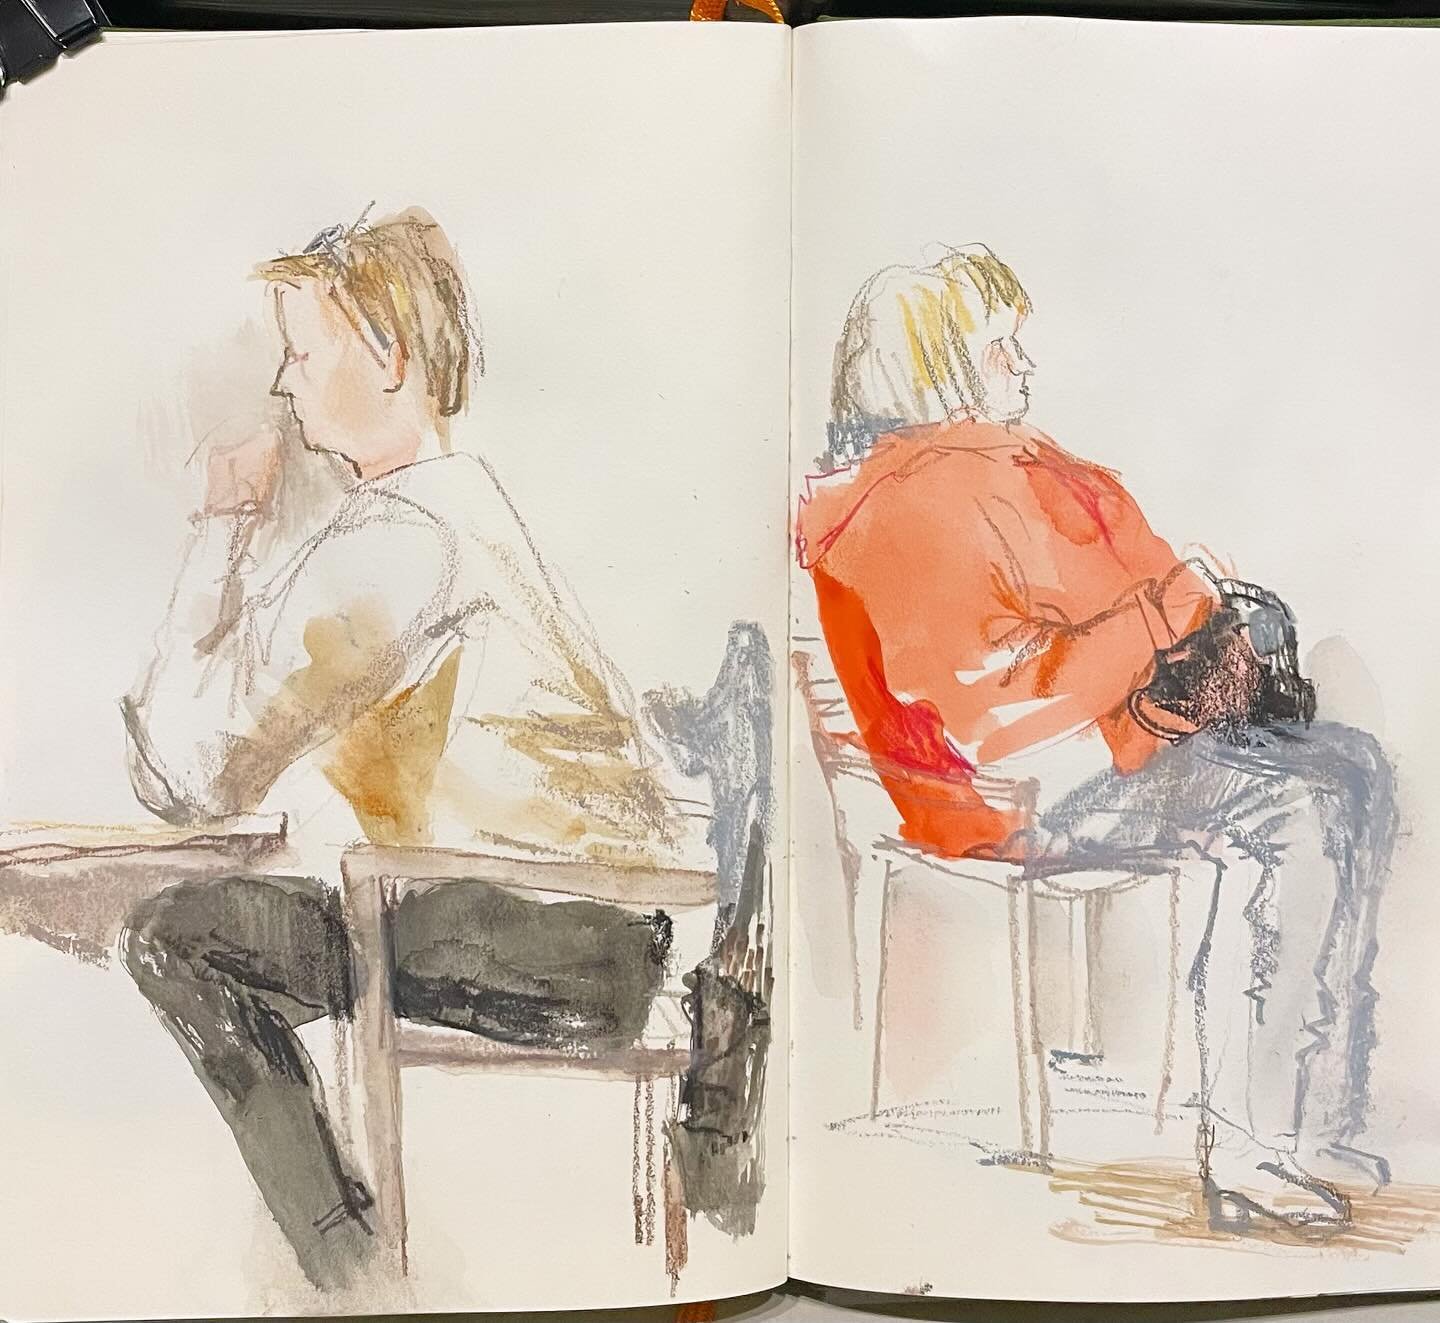 Today&rsquo;s post: rainy day cafe people. 
#cafesketch #raindaycafe #sketchbookdrawing #sketchbook #peopledrawing #italy #tourist #drawingitaly #portovenere #portovenereitaly #sketchingpeople #italia